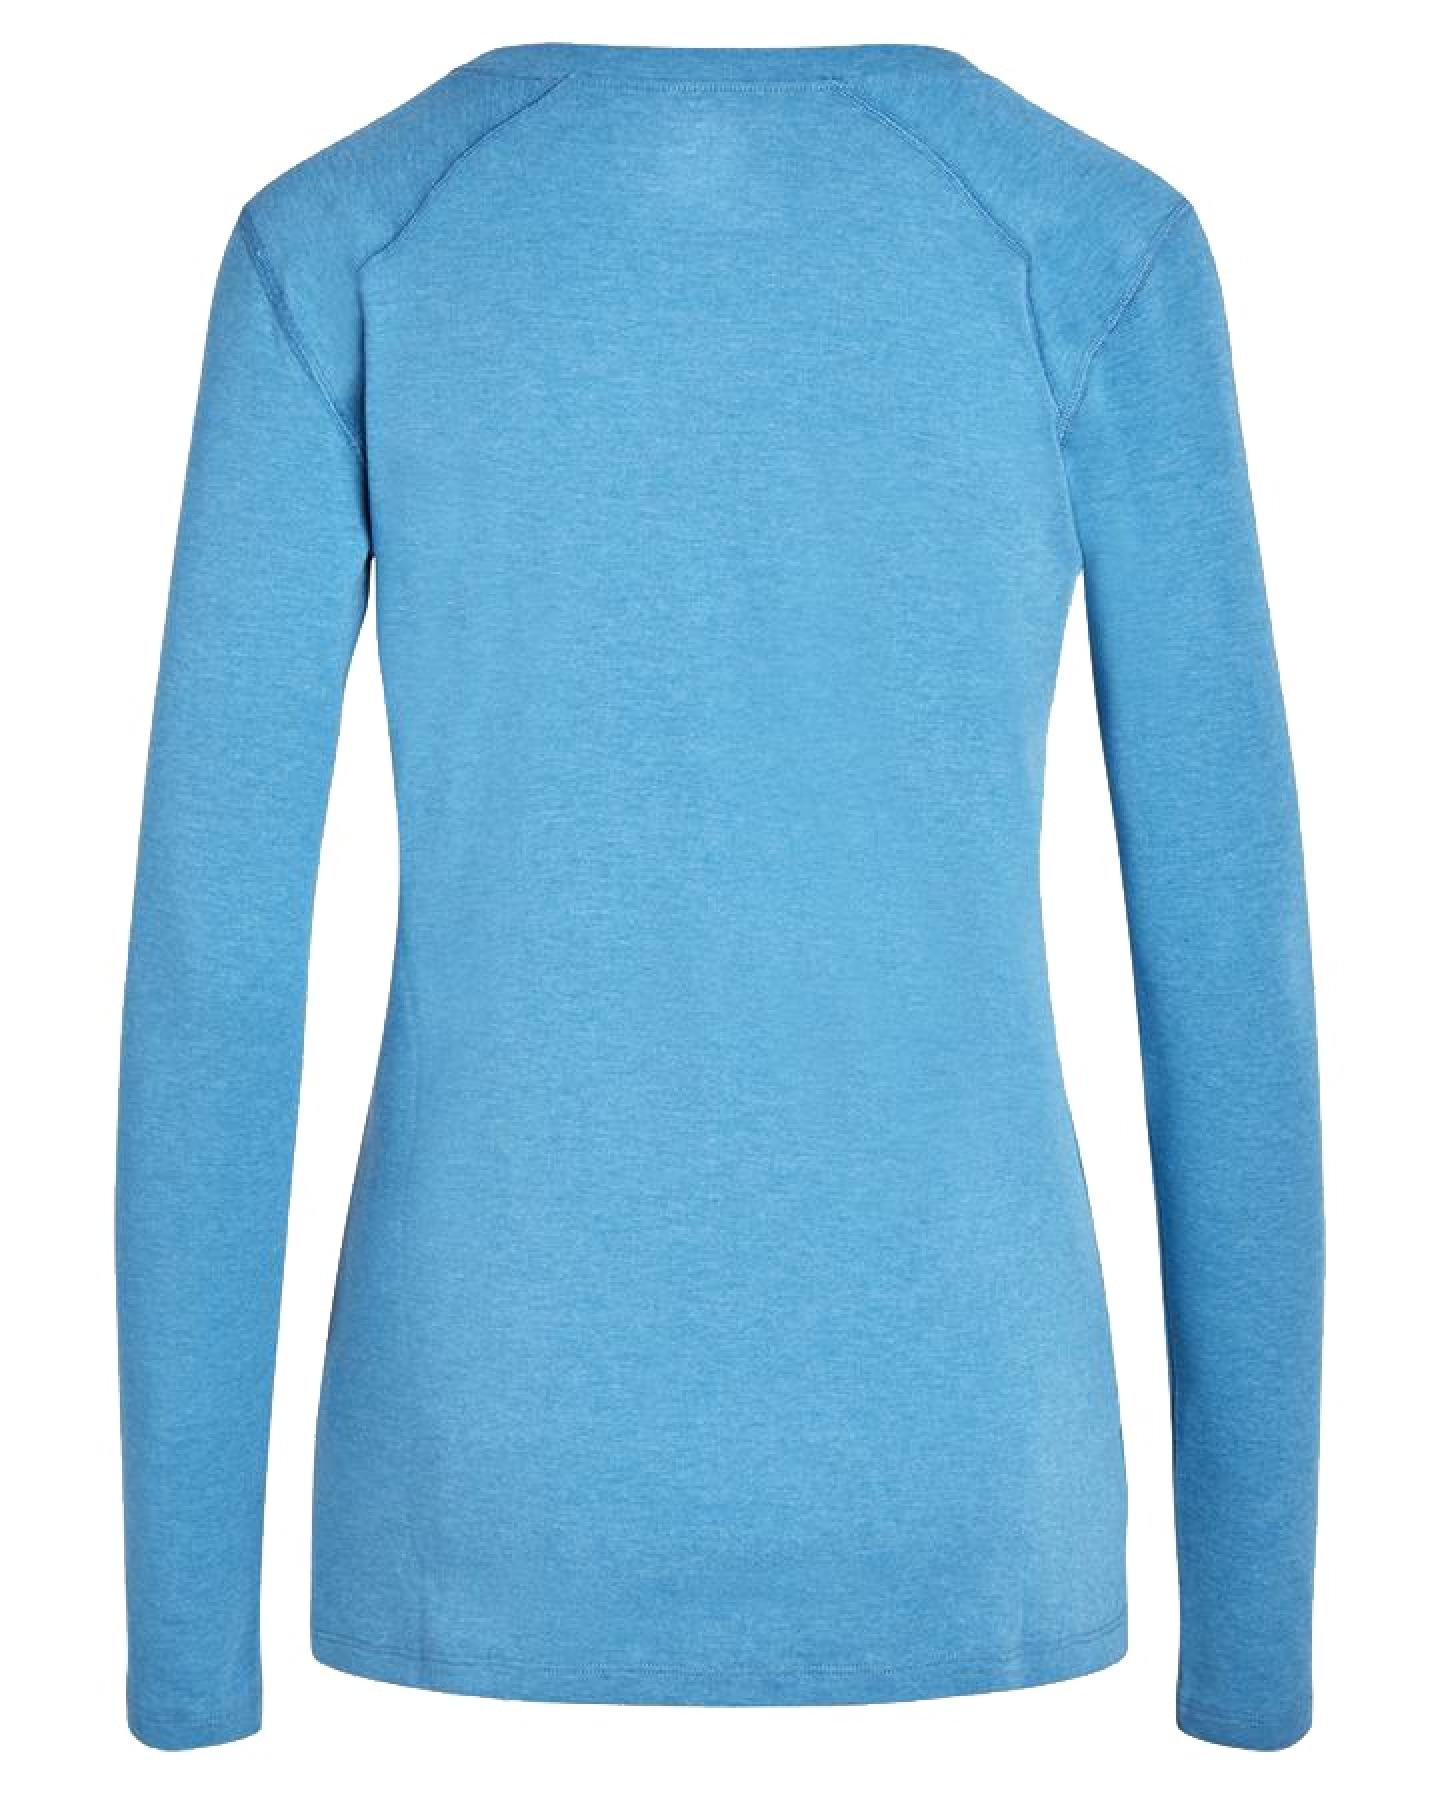 Noble Outfitters Women's Tug-Free™ Long Sleeve